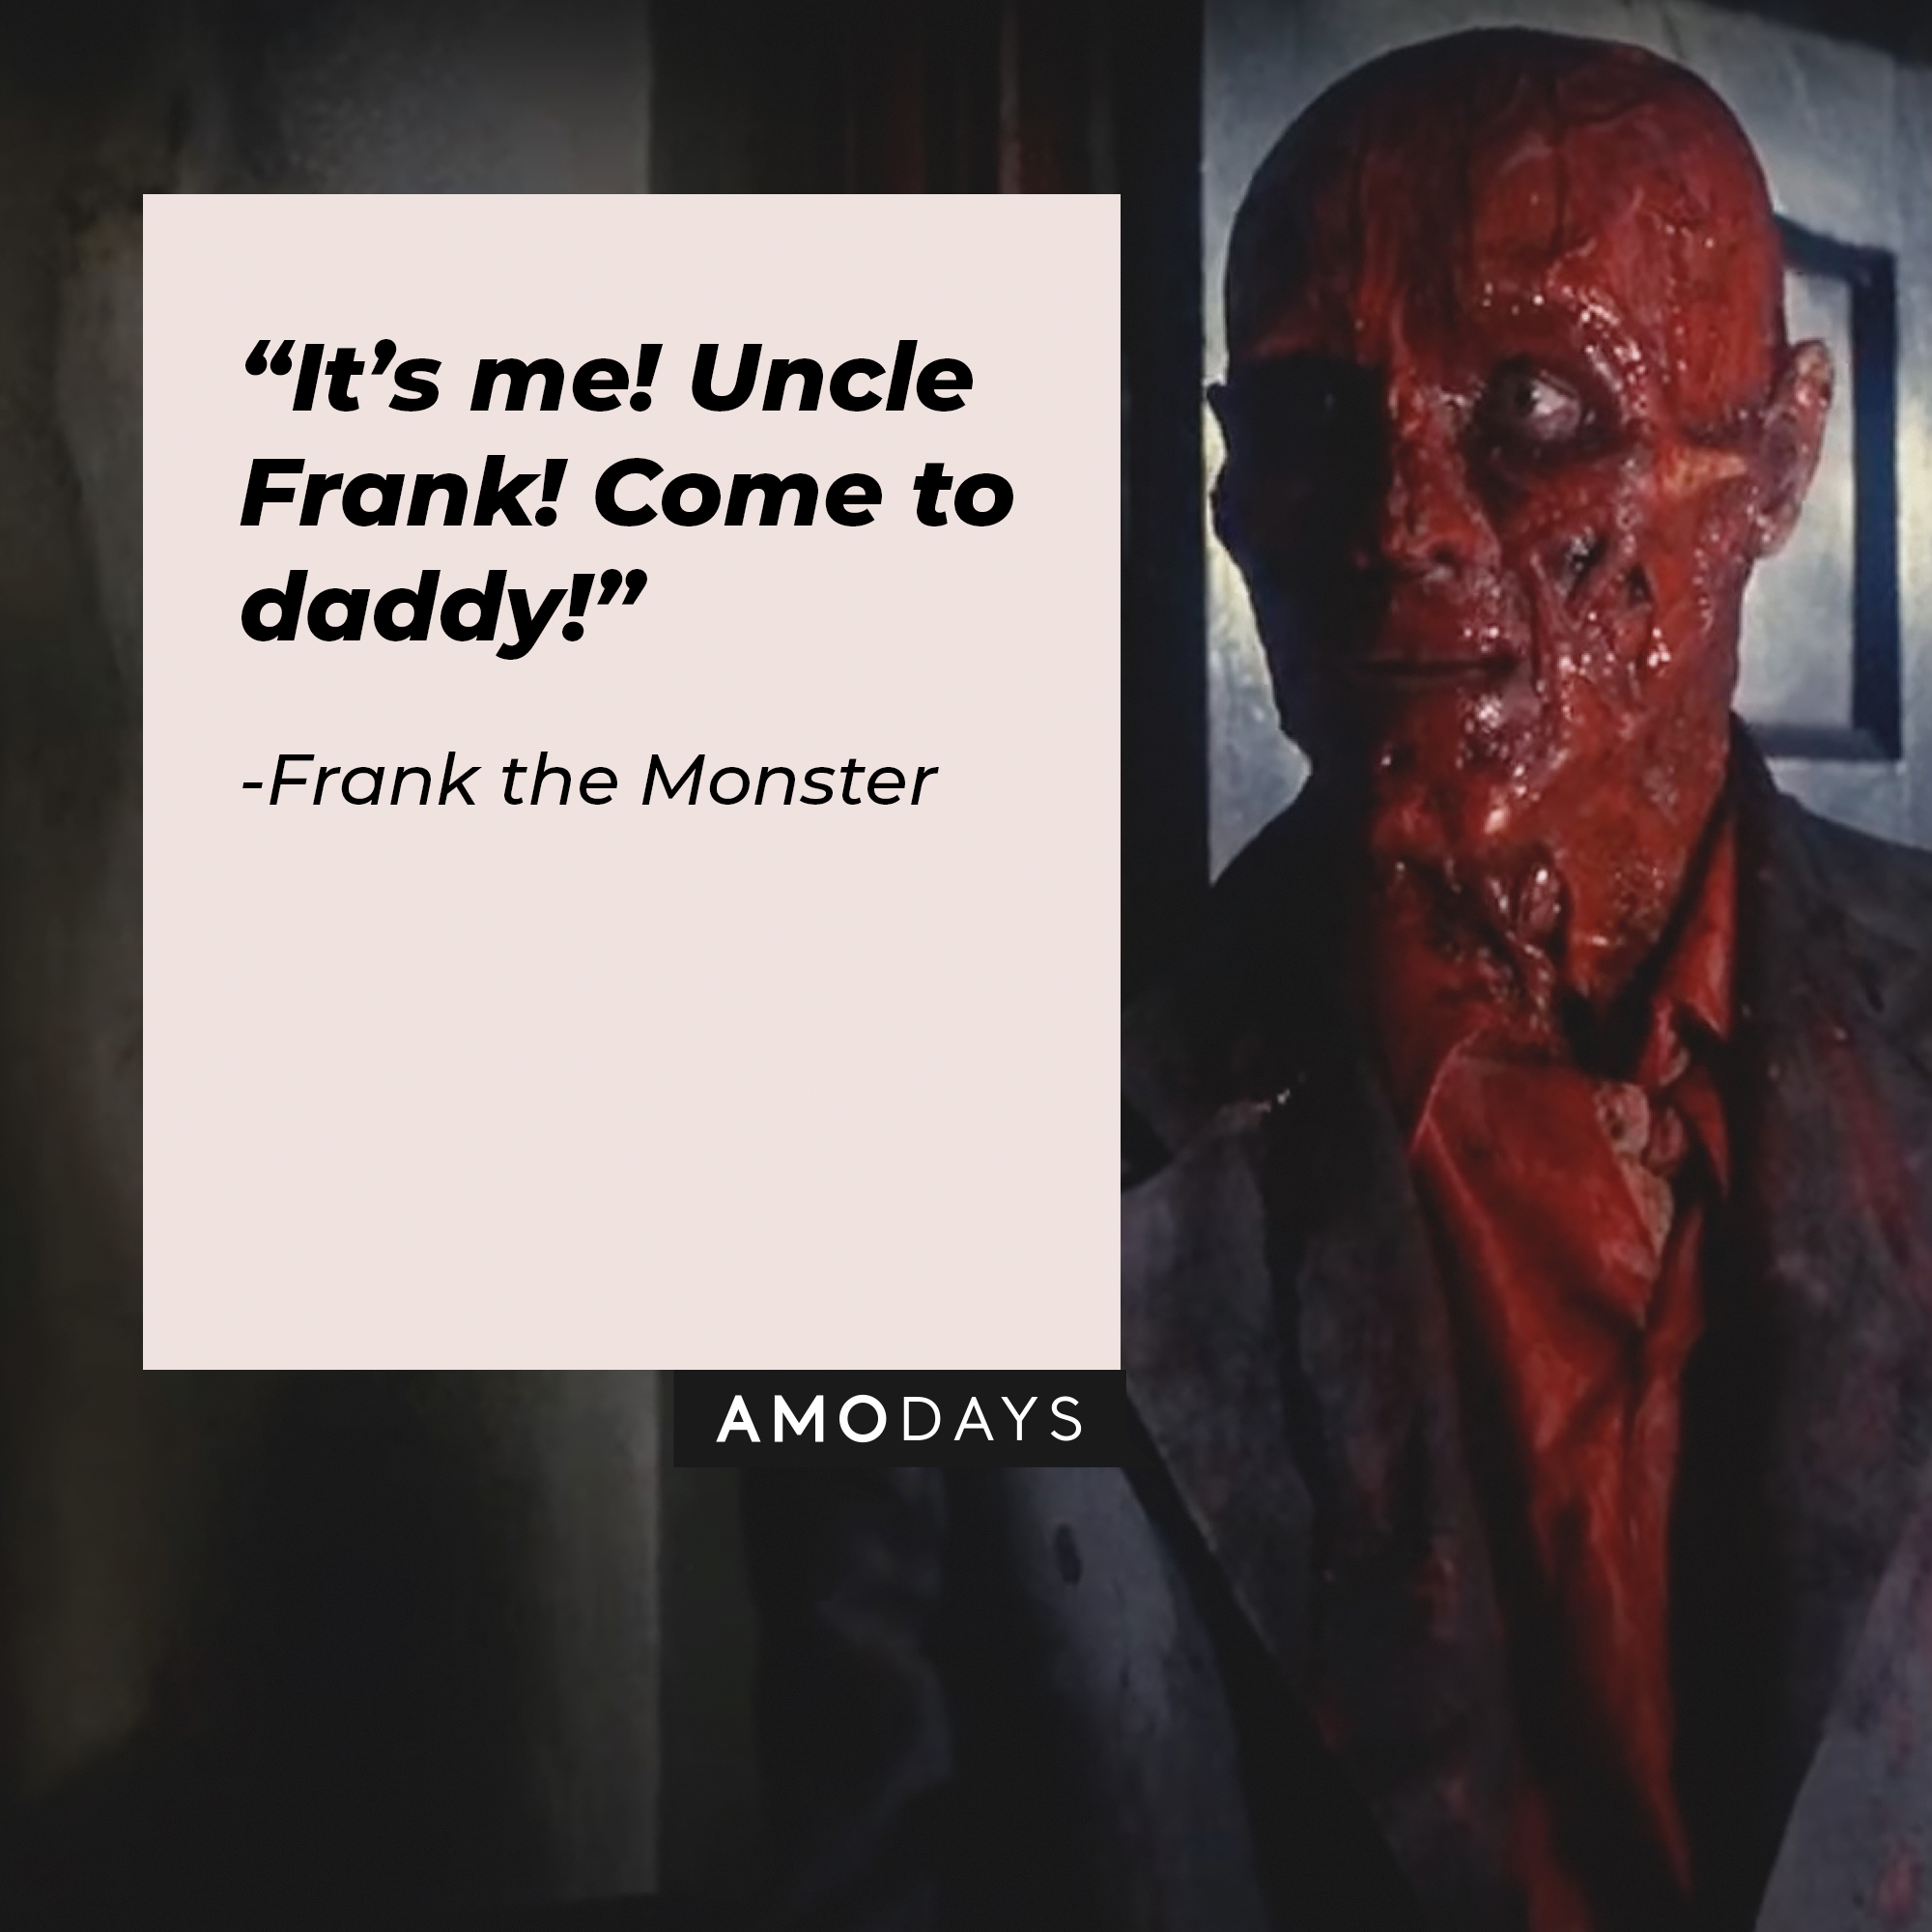 A picture of Frank the Monster from “Hellraiser” with a quote by him that reads, ““It’s me! Uncle Frank! Come to daddy!” | Image: facebook.com/HellraiserMovies